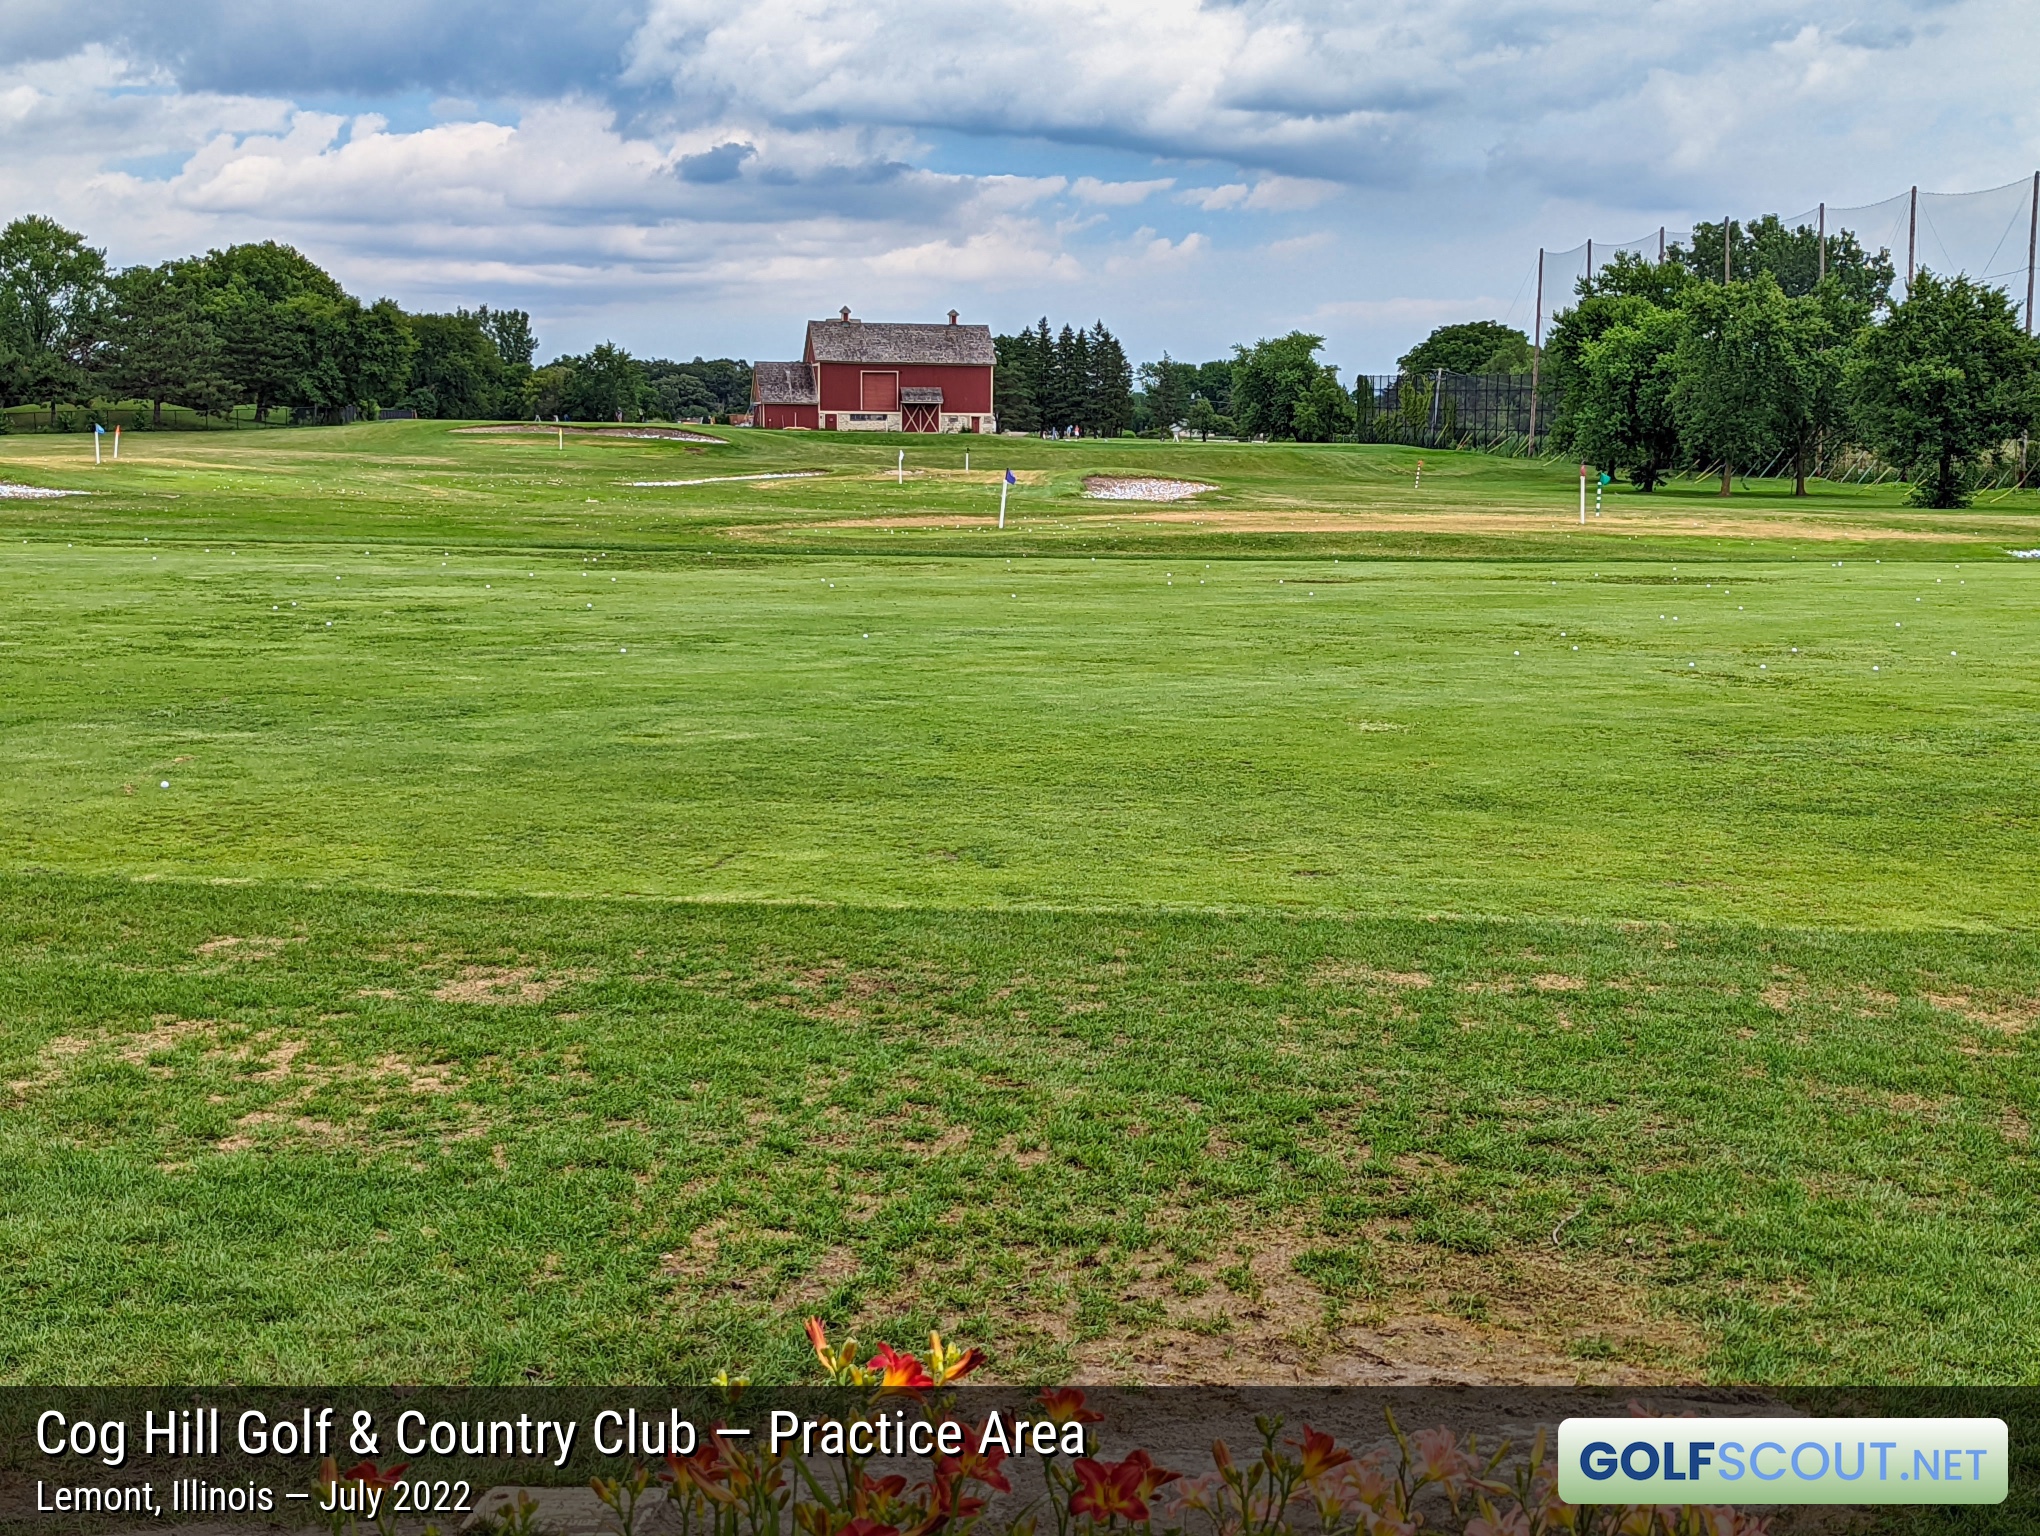 Photo of the practice area at Cog Hill Course #4 - Dubsdread in Lemont, Illinois. The old Cog Hill barn in the distance at the back of the range. Lots of flags to hit to.